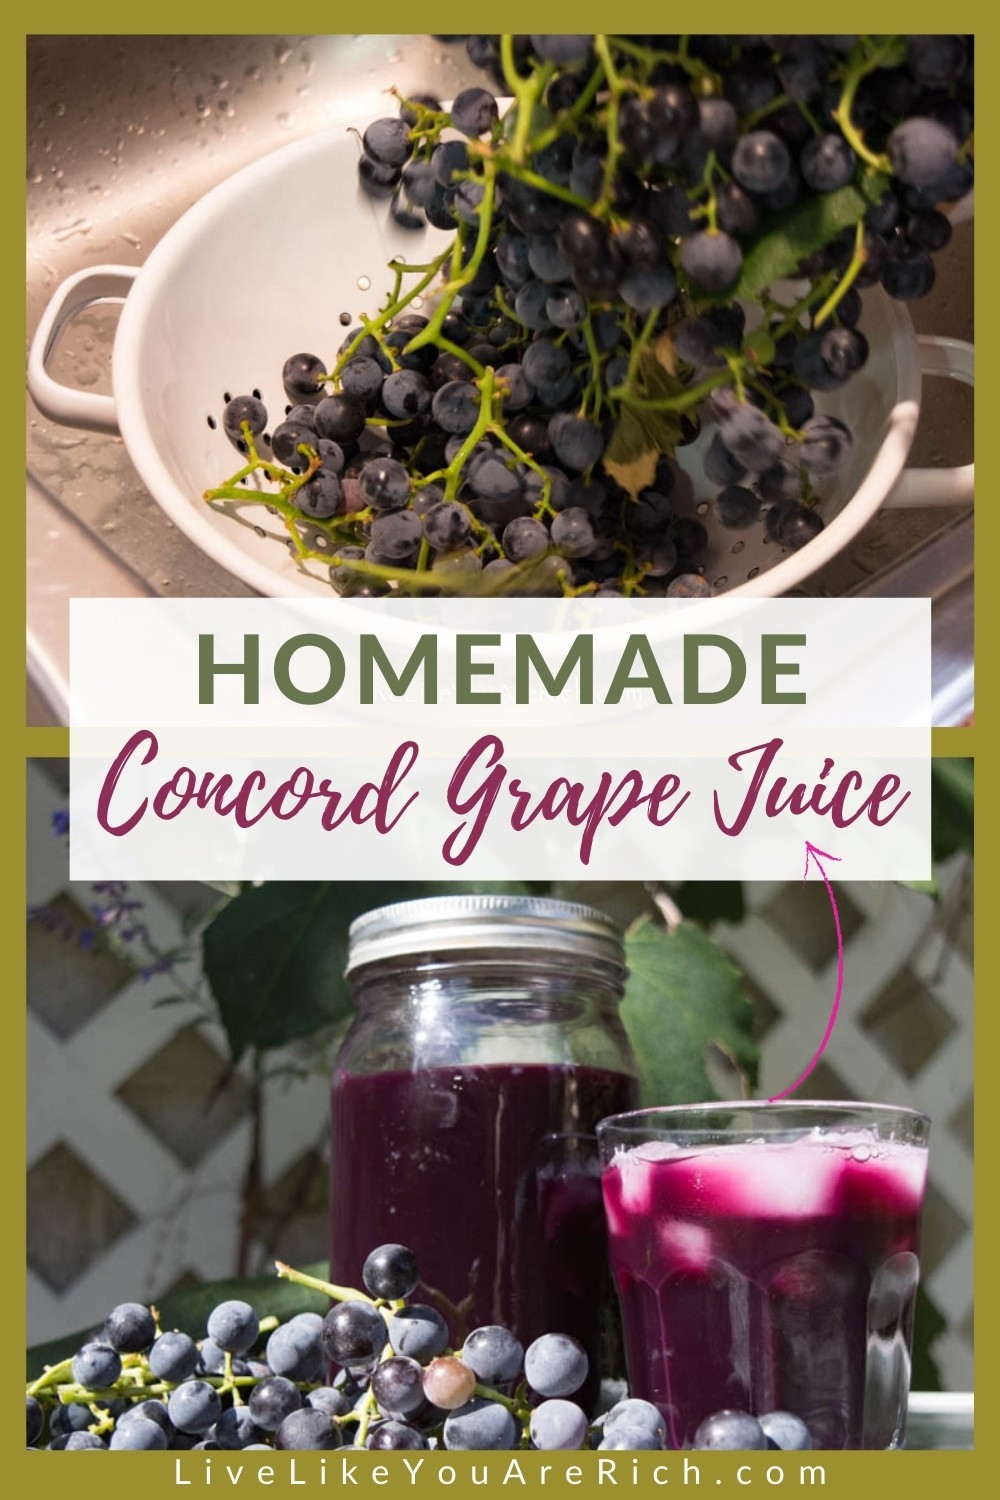 My mom has been an avid concord grape grower. She has many beautiful vines that produce a lot of grapes each Fall. Each Fall, we pick the grapes and juice them. My family and friends love the grape juice — especially mixed with Sprite or pink lemonade and chilled with ice. I’m sharing how she makes this homemade concord grape juice recipe. #grapejuice #concordgrapejuice